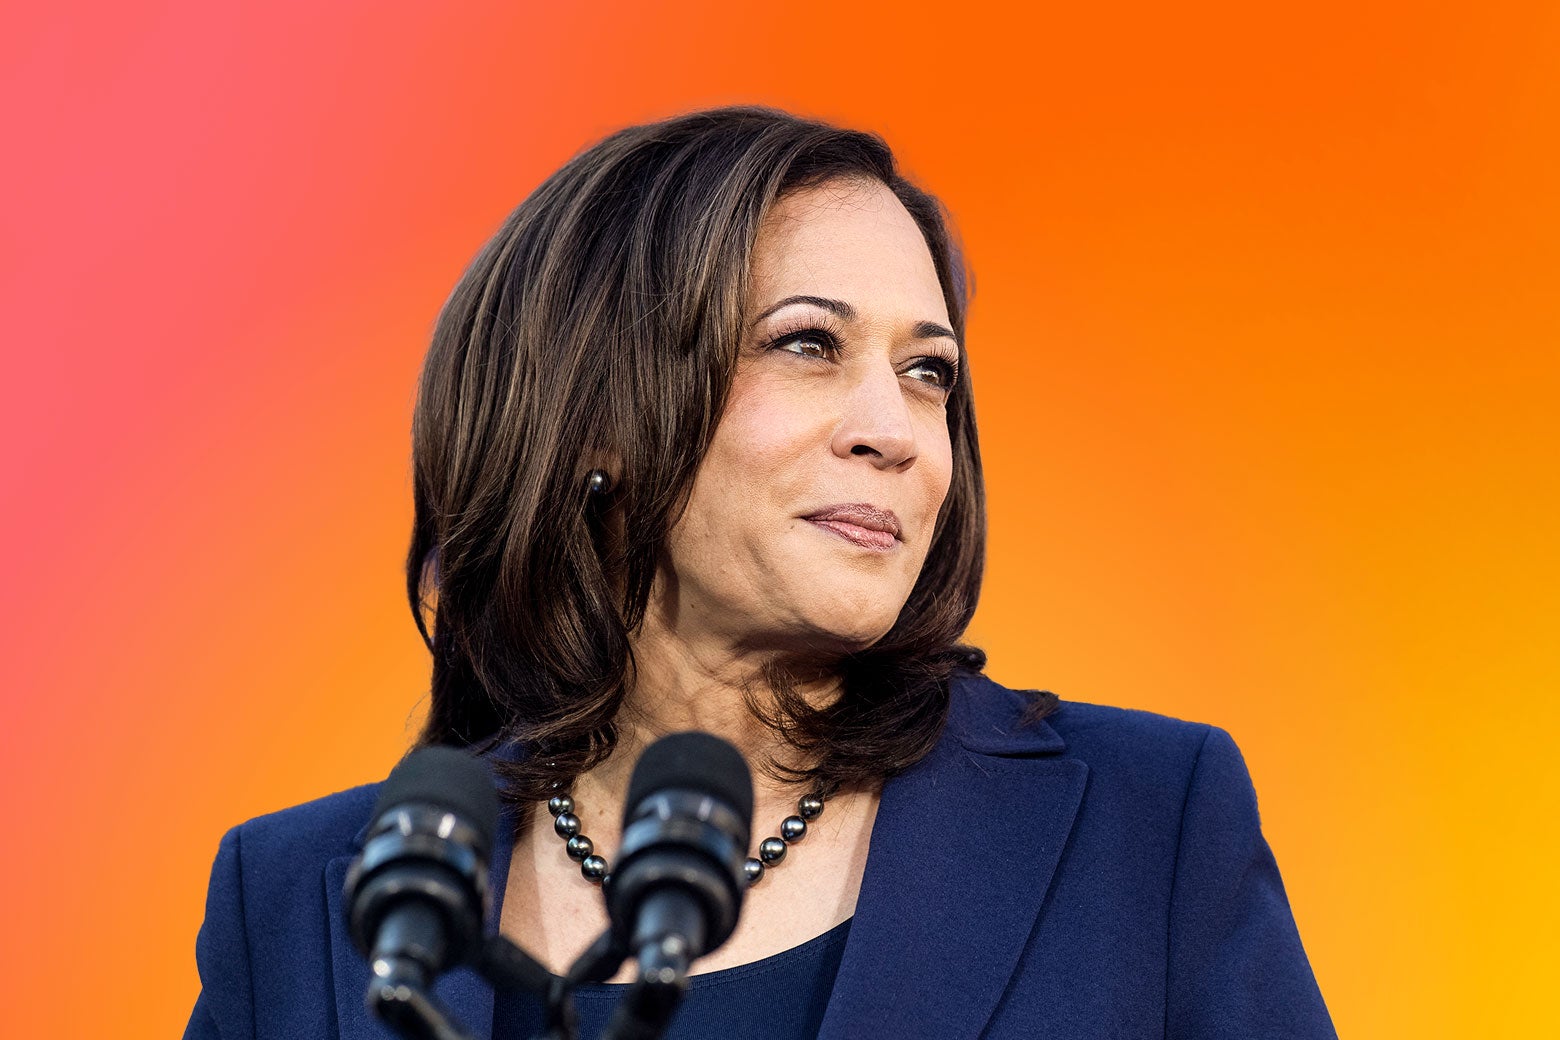 Let Me Make Sure I Understand: Kamala Harris Is Too Hot and Childless to Be President?